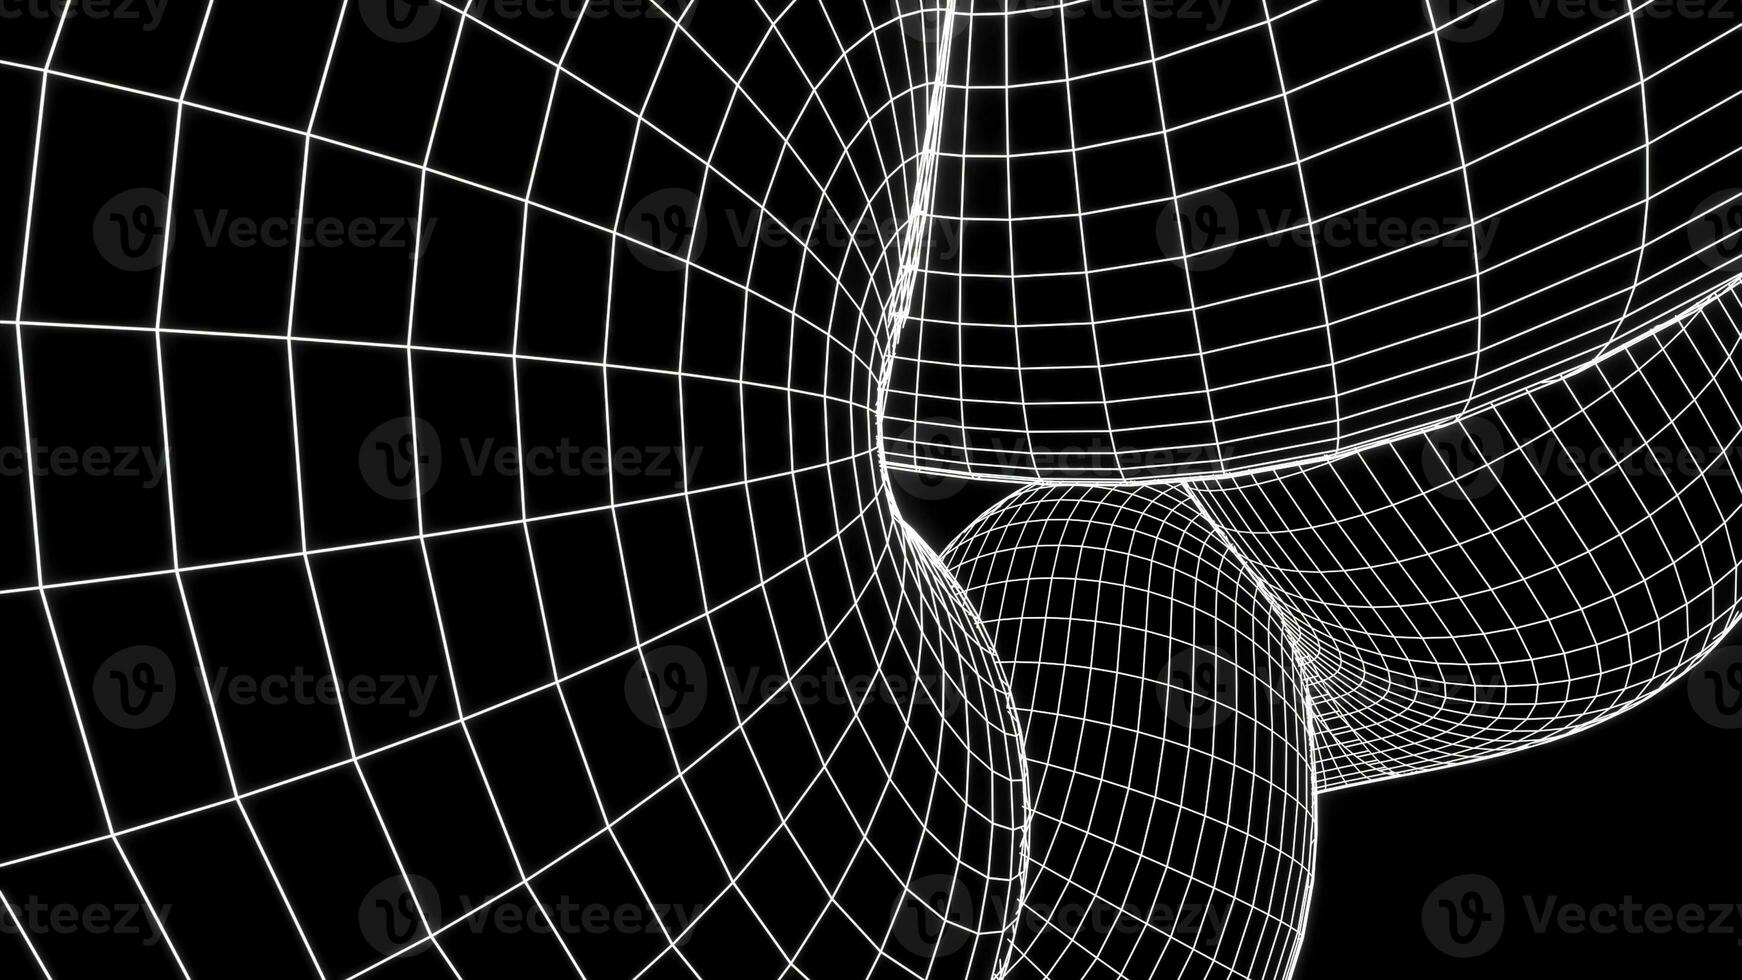 Monochrome surface of spacetime grid, seamless loop. Design. Black and white 3D flowing grid, scientific concept. photo